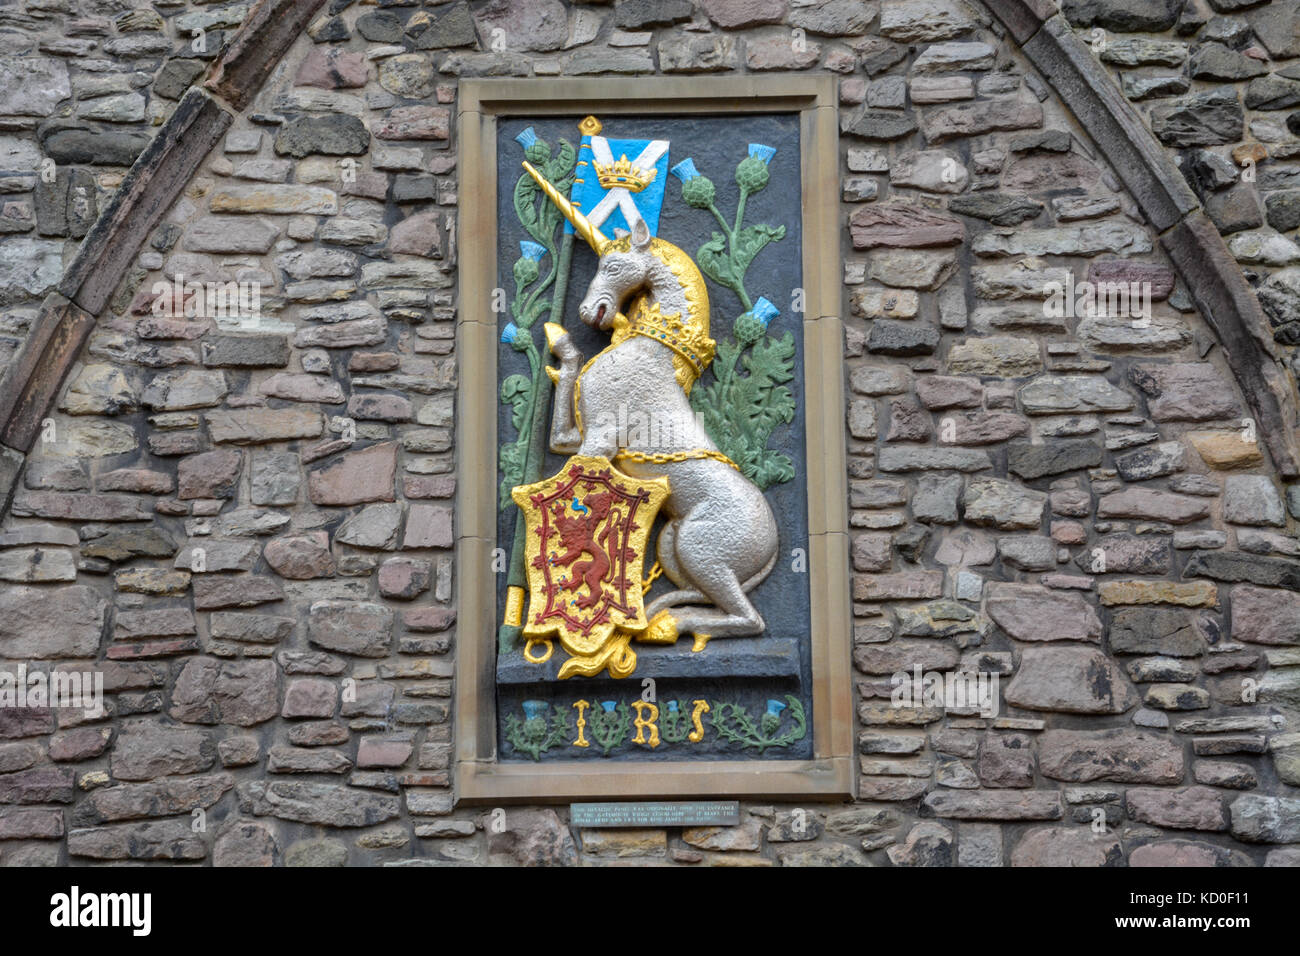 Unicorn with the Scottish flag and an emblem with a red lion on gold on a stone wall Stock Photo